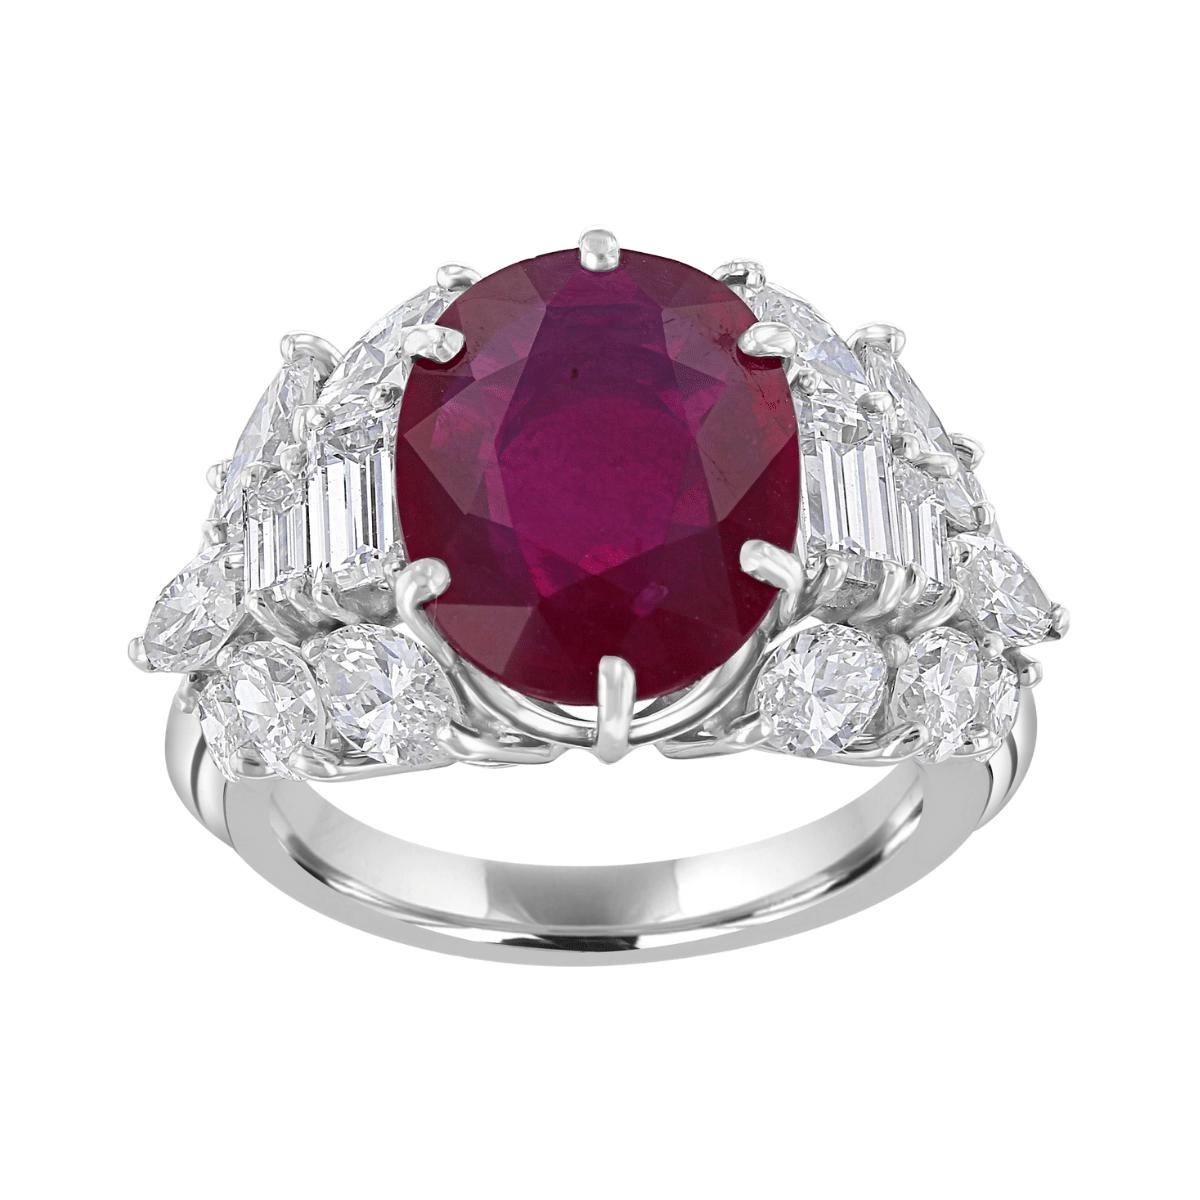 18KT GOLD 6.26 CT RUBY & 3.82 CTW DIAMOND ACCENT VINTAGE RING 4,4.5,5,5.5,6,6.5,7,7.5,8,8.5,9,9.5,10,10.5,11,11.5,12,12.5,13,13.5,14